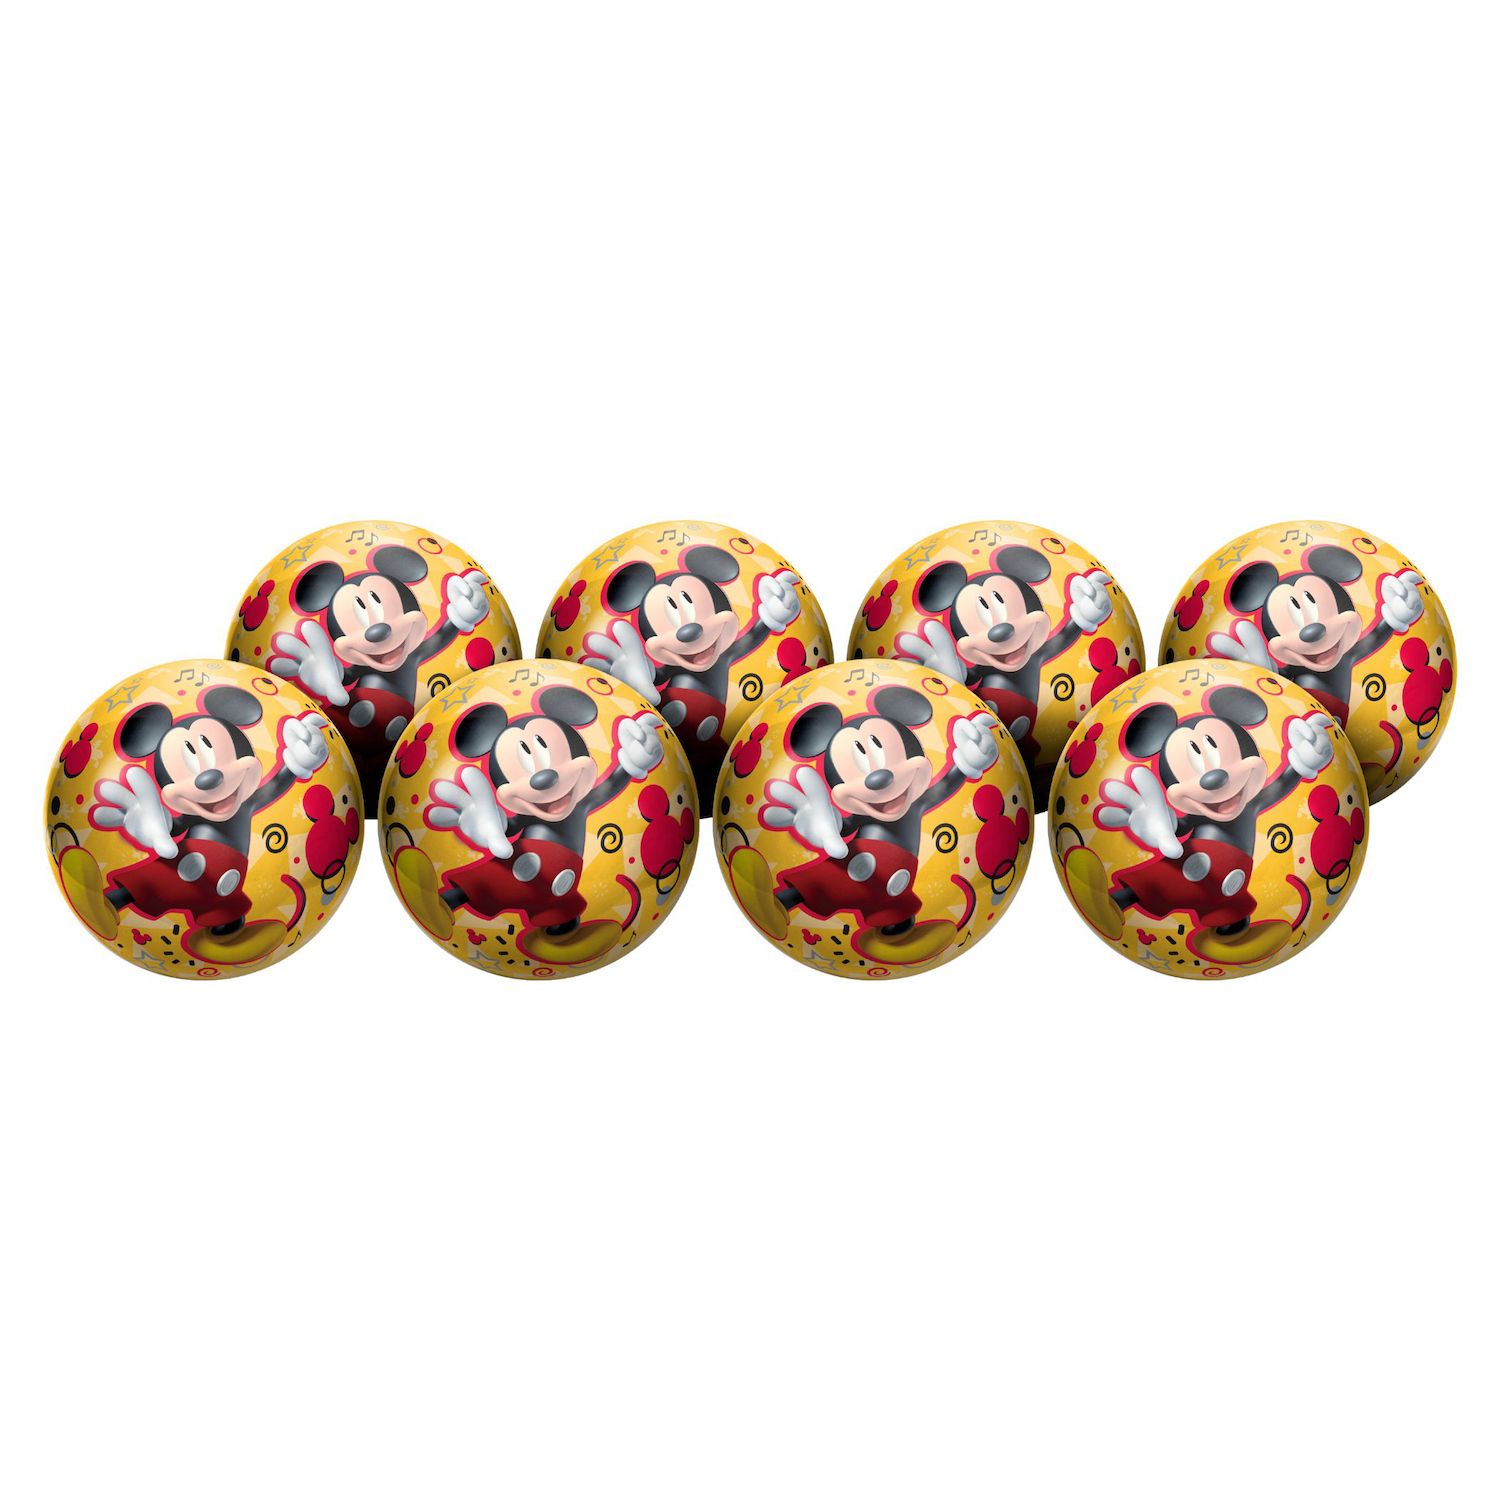 Image for Hedstrom Disney's Mickey Mouse 8-Pack Playball Party Pack at Kohl's.